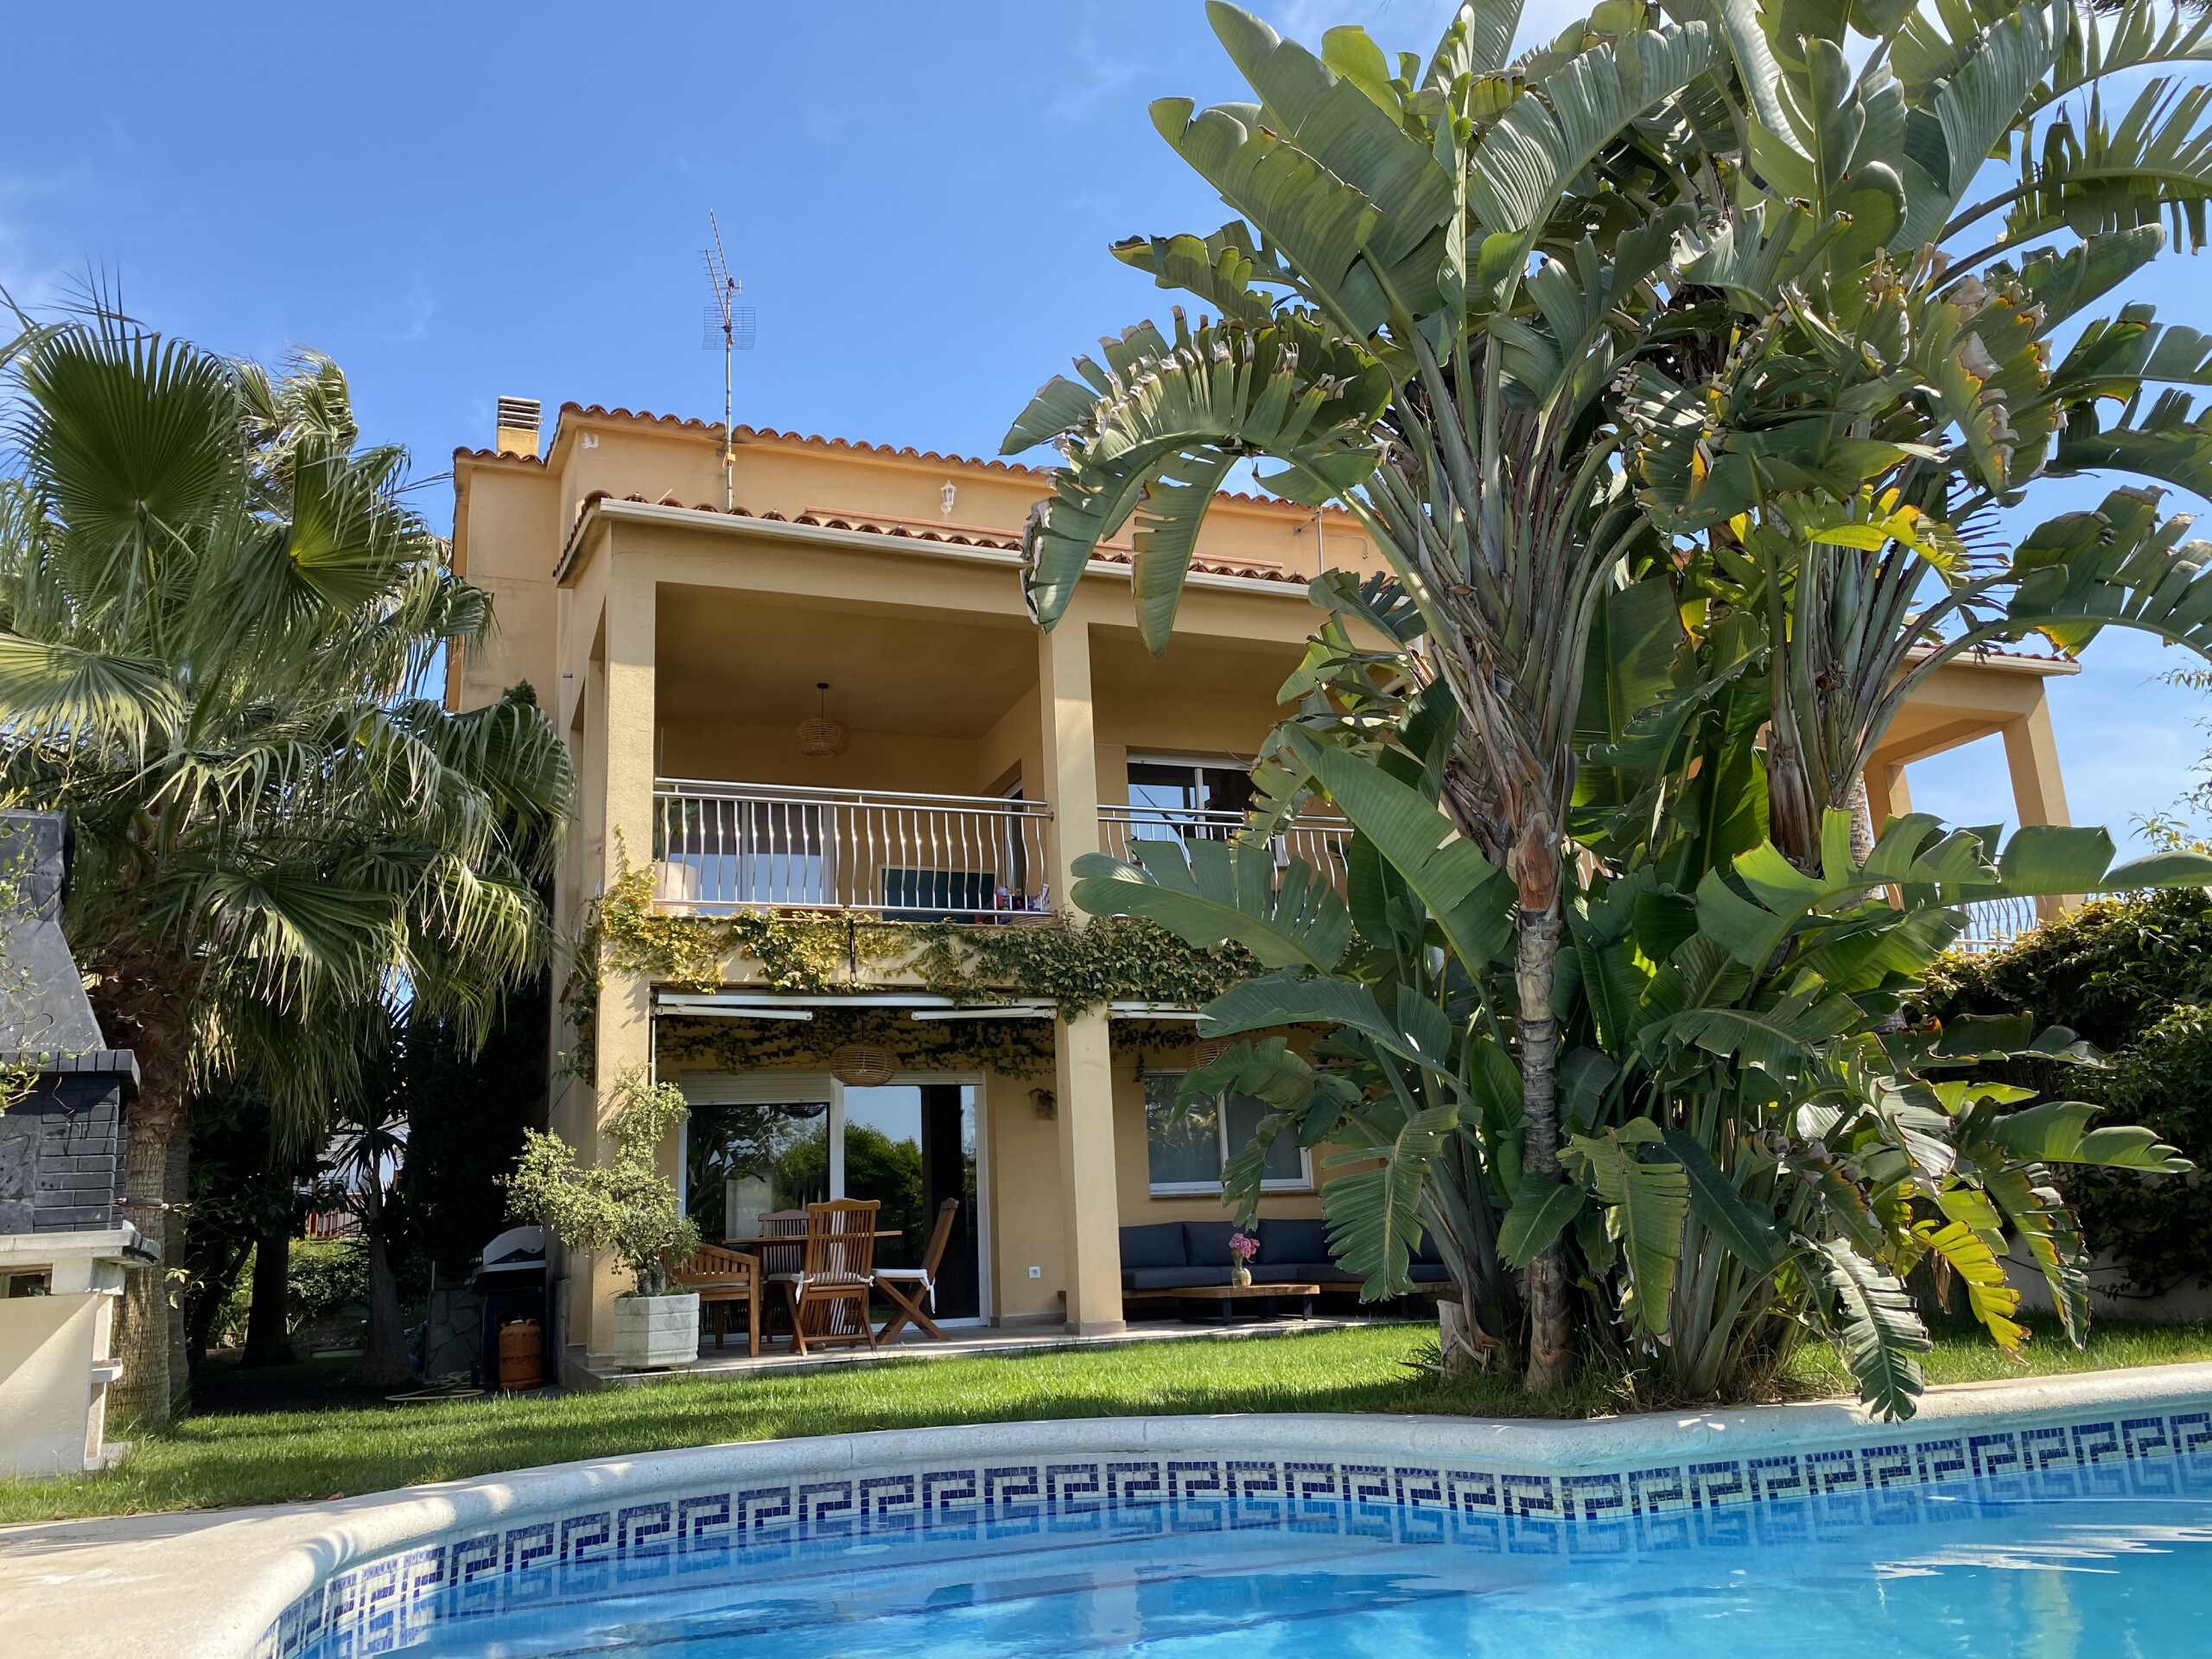 Property Image 1 - Rocamar (5 min from Sitges beach)